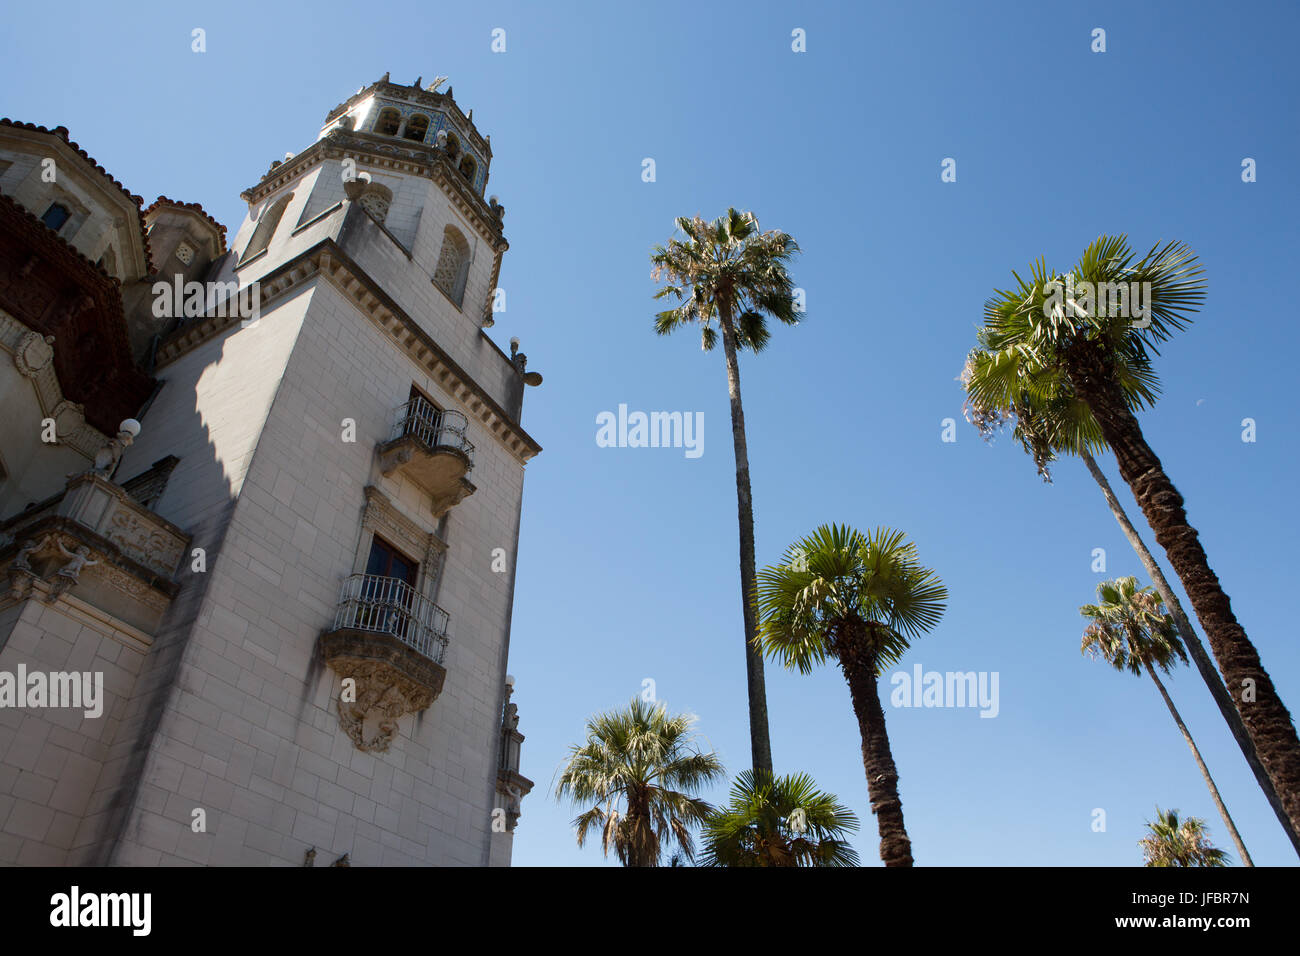 An exterior view of Hearst Castle and Casa Grande near palm trees. Stock Photo